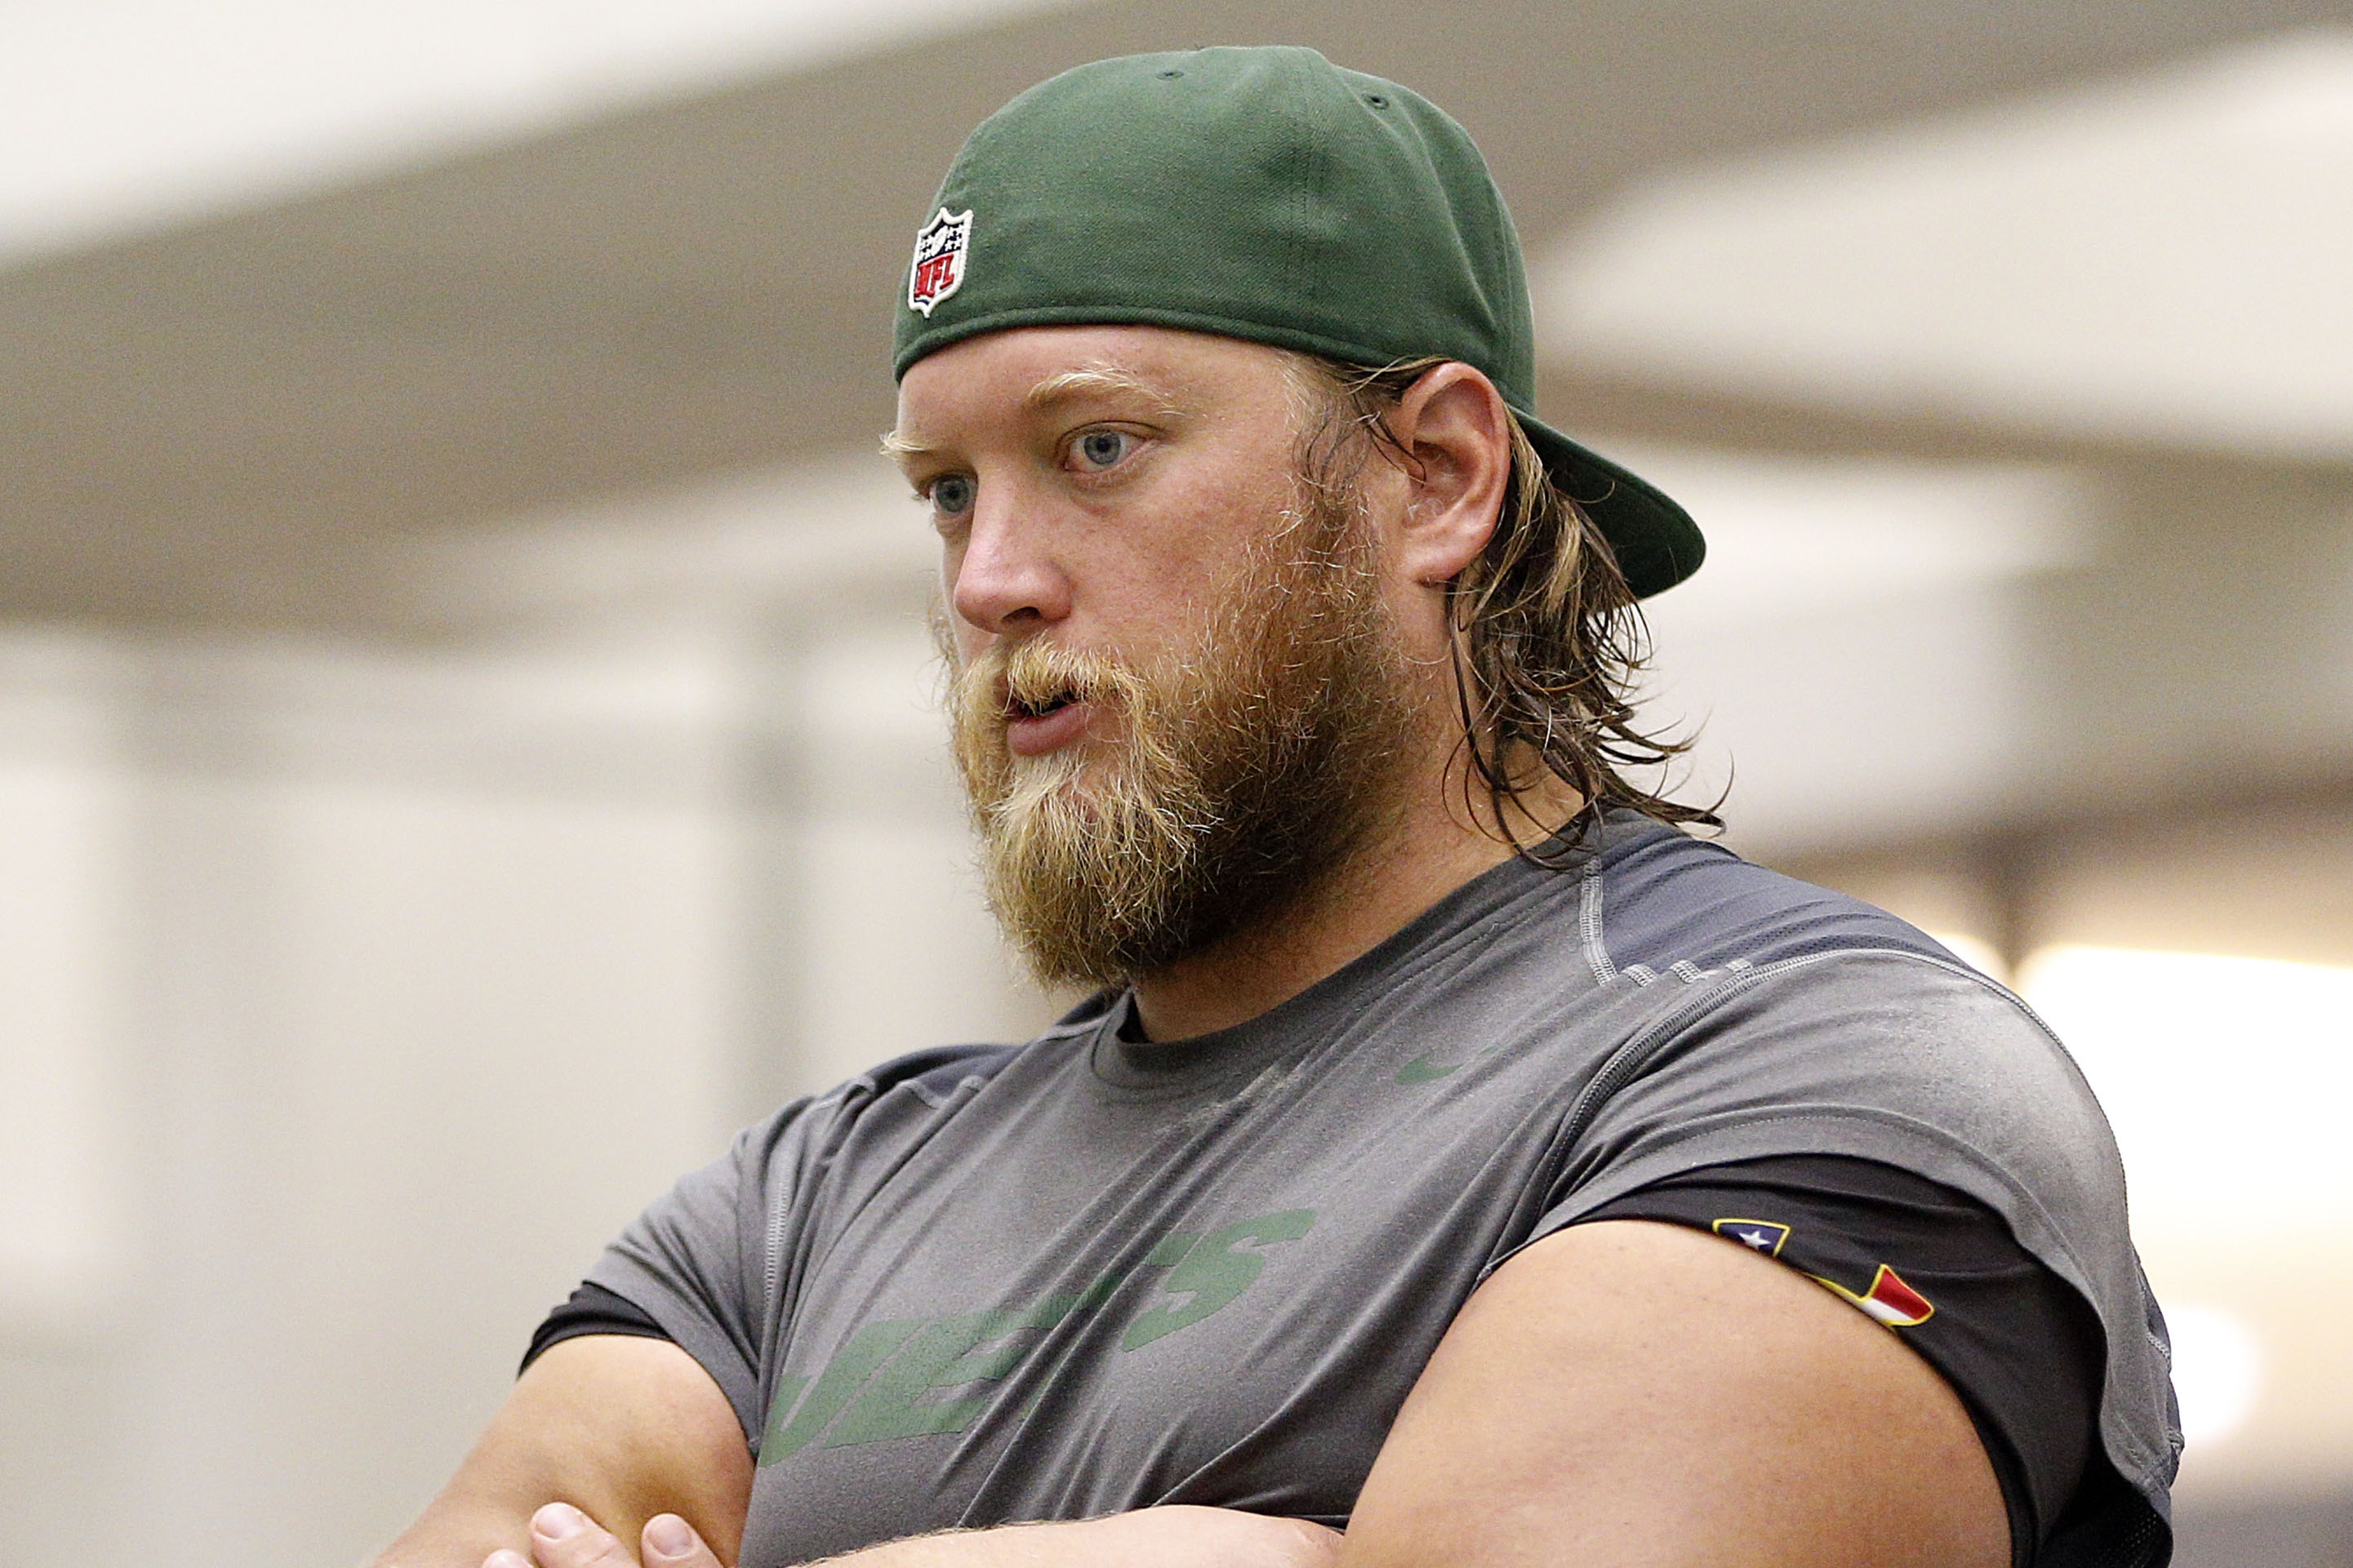 It has been far from easy for Nick Mangold since Jets cut him